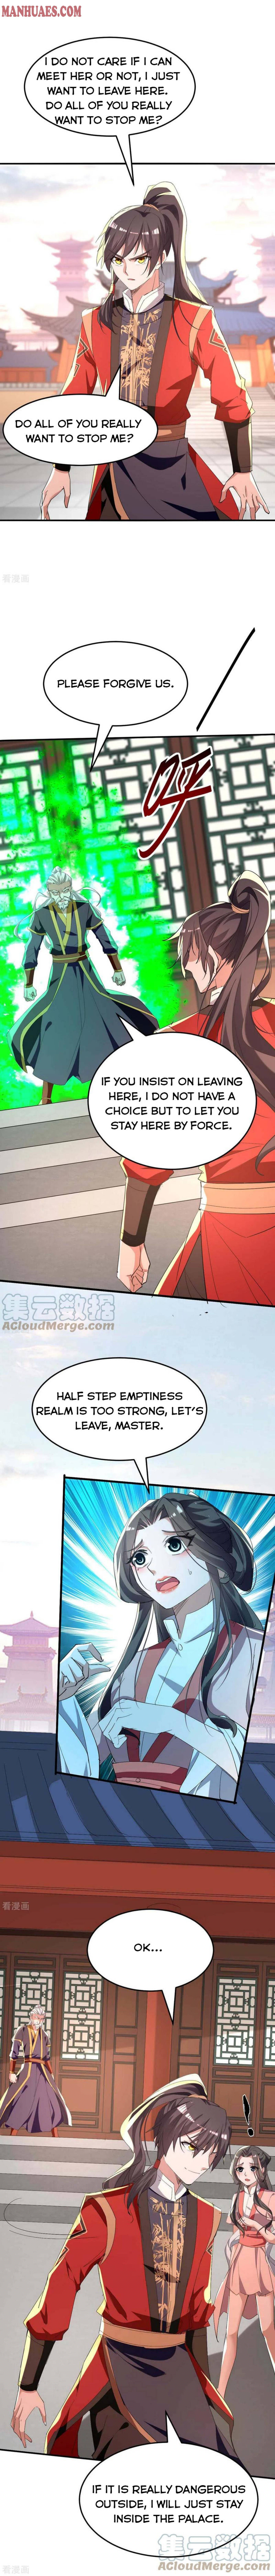 Return of Immortal Emperor Chapter 252 - Page 2